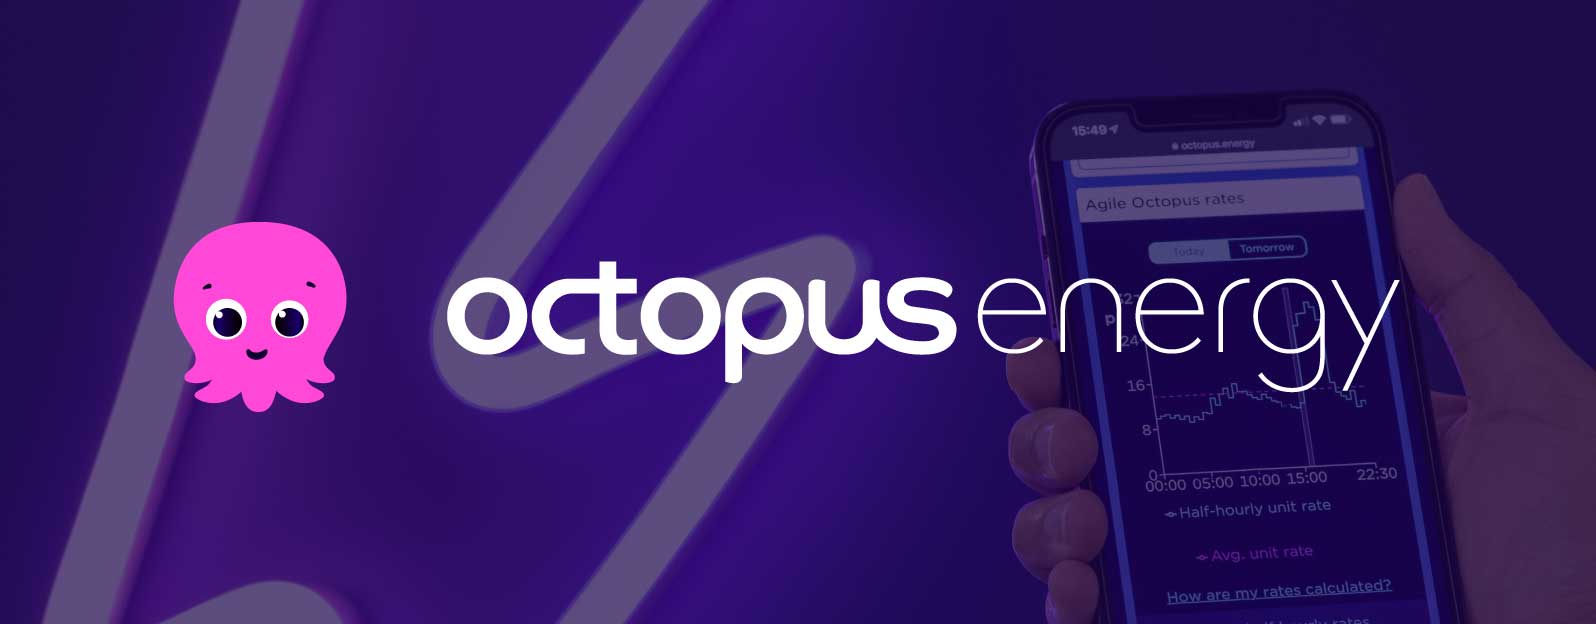 Octopus energy have purchased competitor shell energy